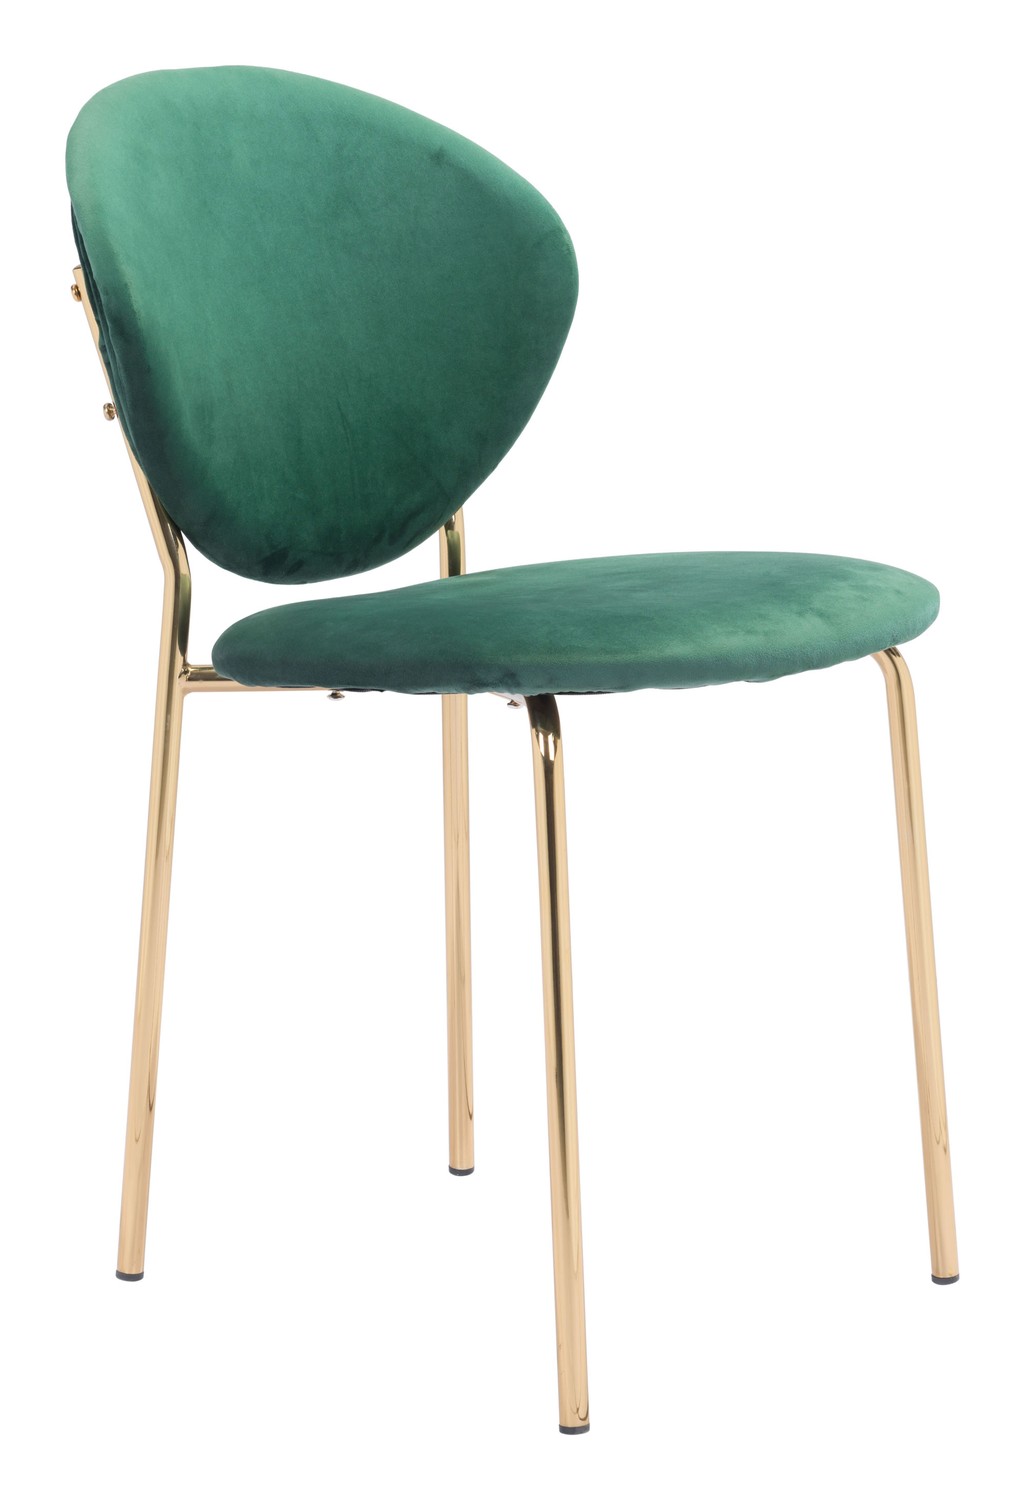 18.1" x 23.6" x 32.3" Green and Gold Velvet Steel and Plywood Chair Set of 2